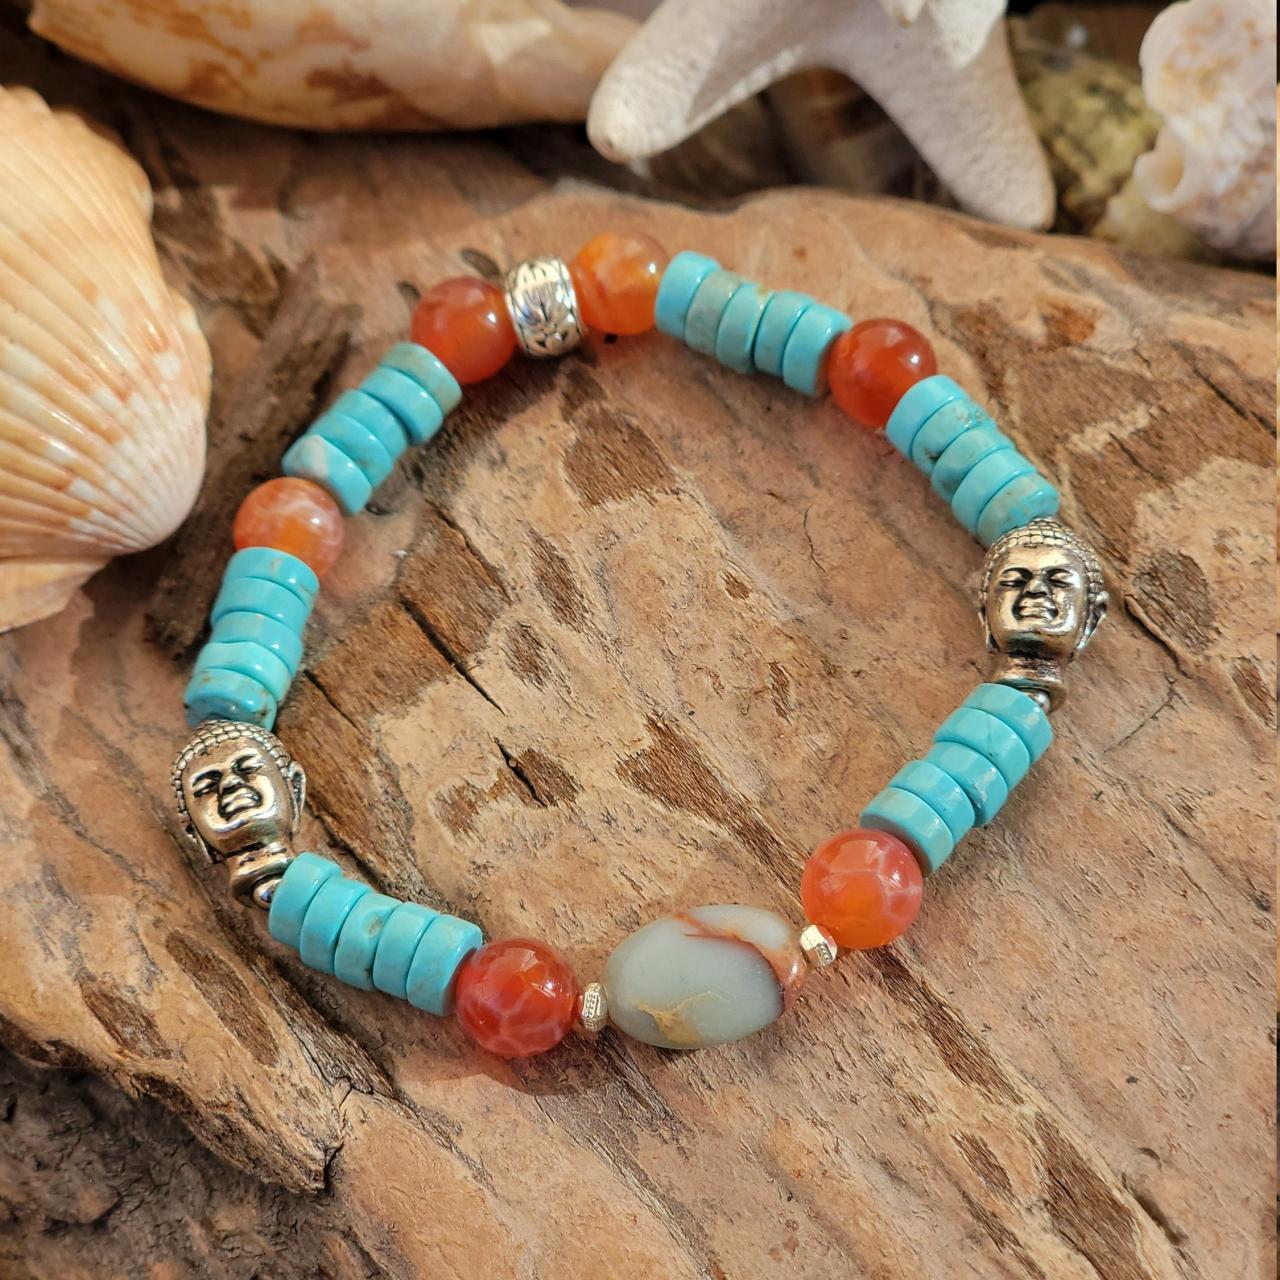 Turquoise, Red Dragon Vein Agate And Serpentine Natural Healing Gemstone Bracelet